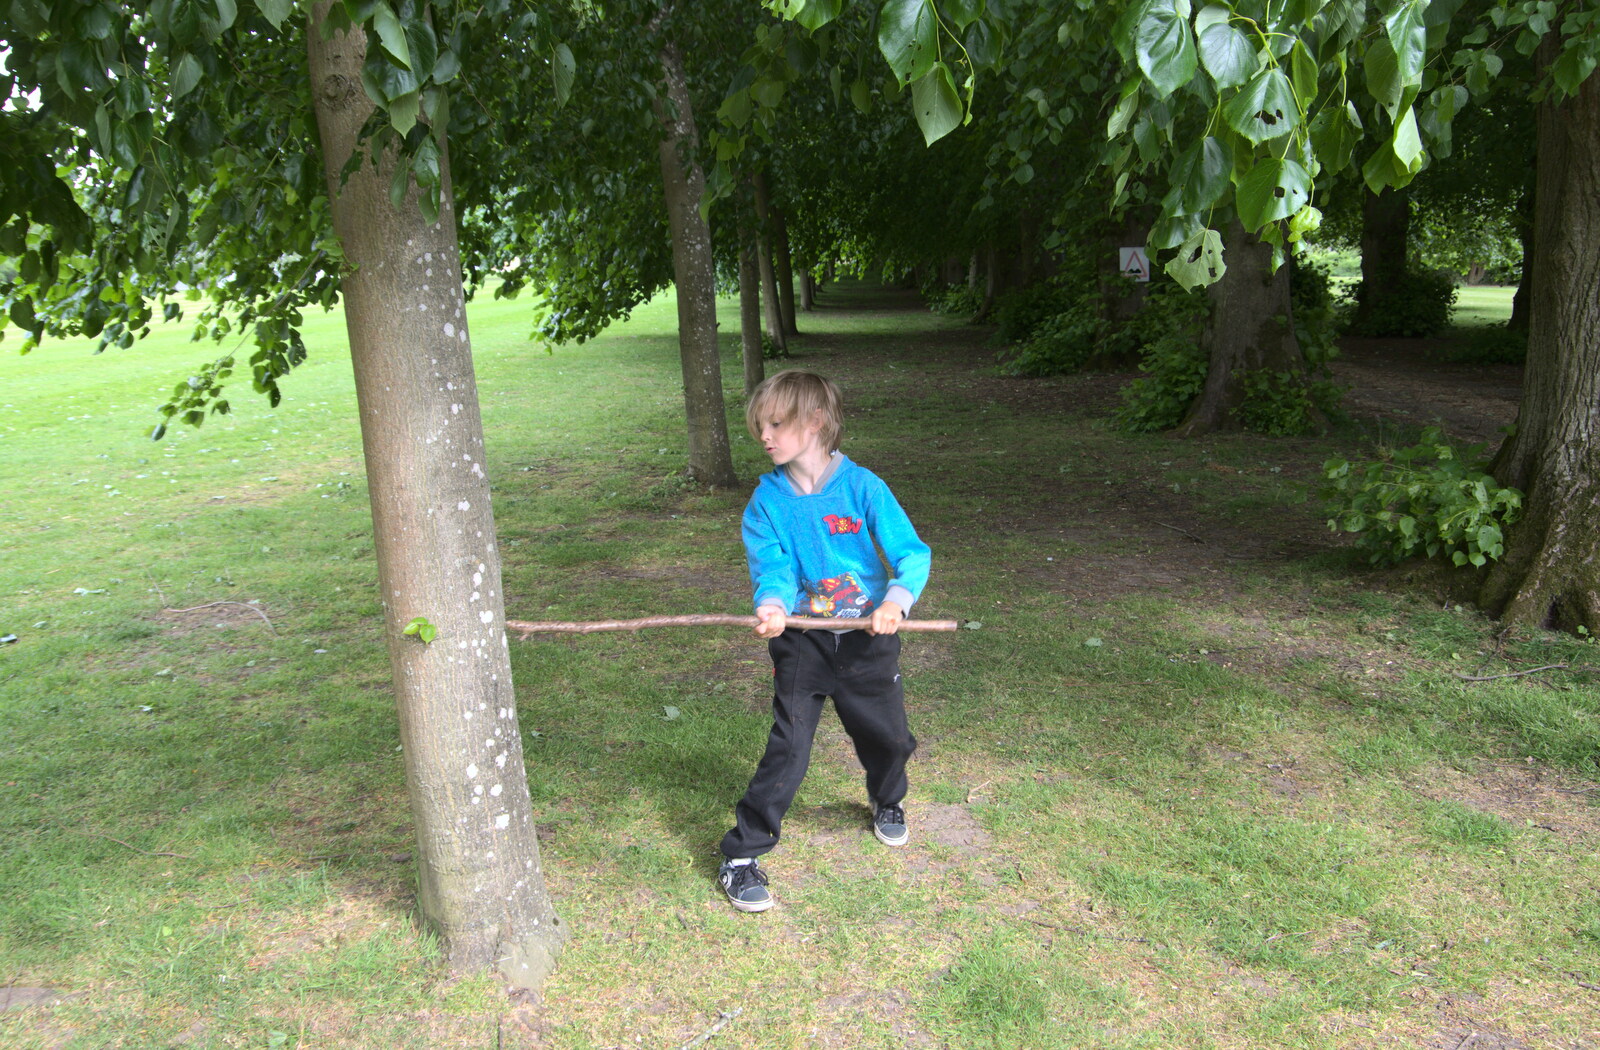 Harry whacks a tree, Ninja-style from More Lockdown Fun, Diss and Eye, Norfolk and Suffolk - 30th May 2020